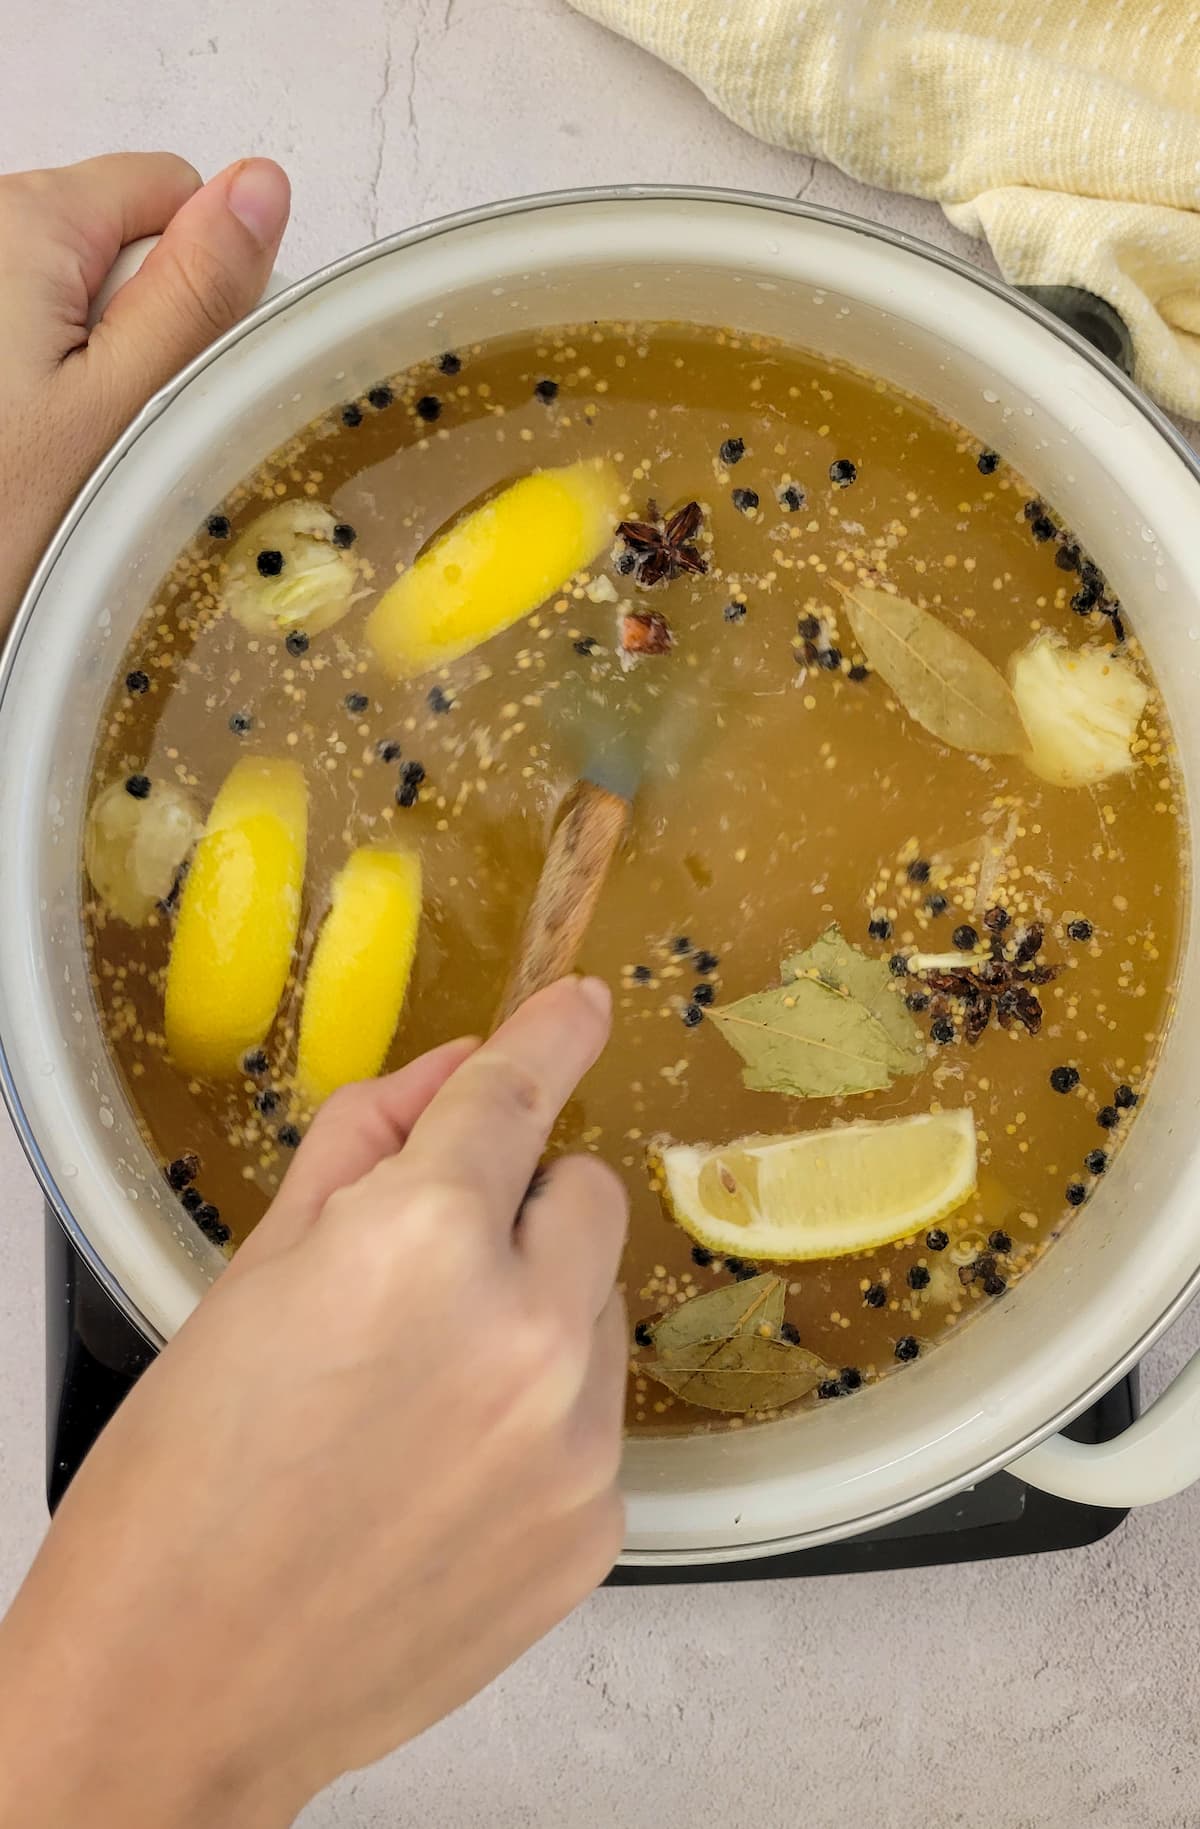 hand stirring liquid in a pot with peppercorns, lemon wedges and bay leaves